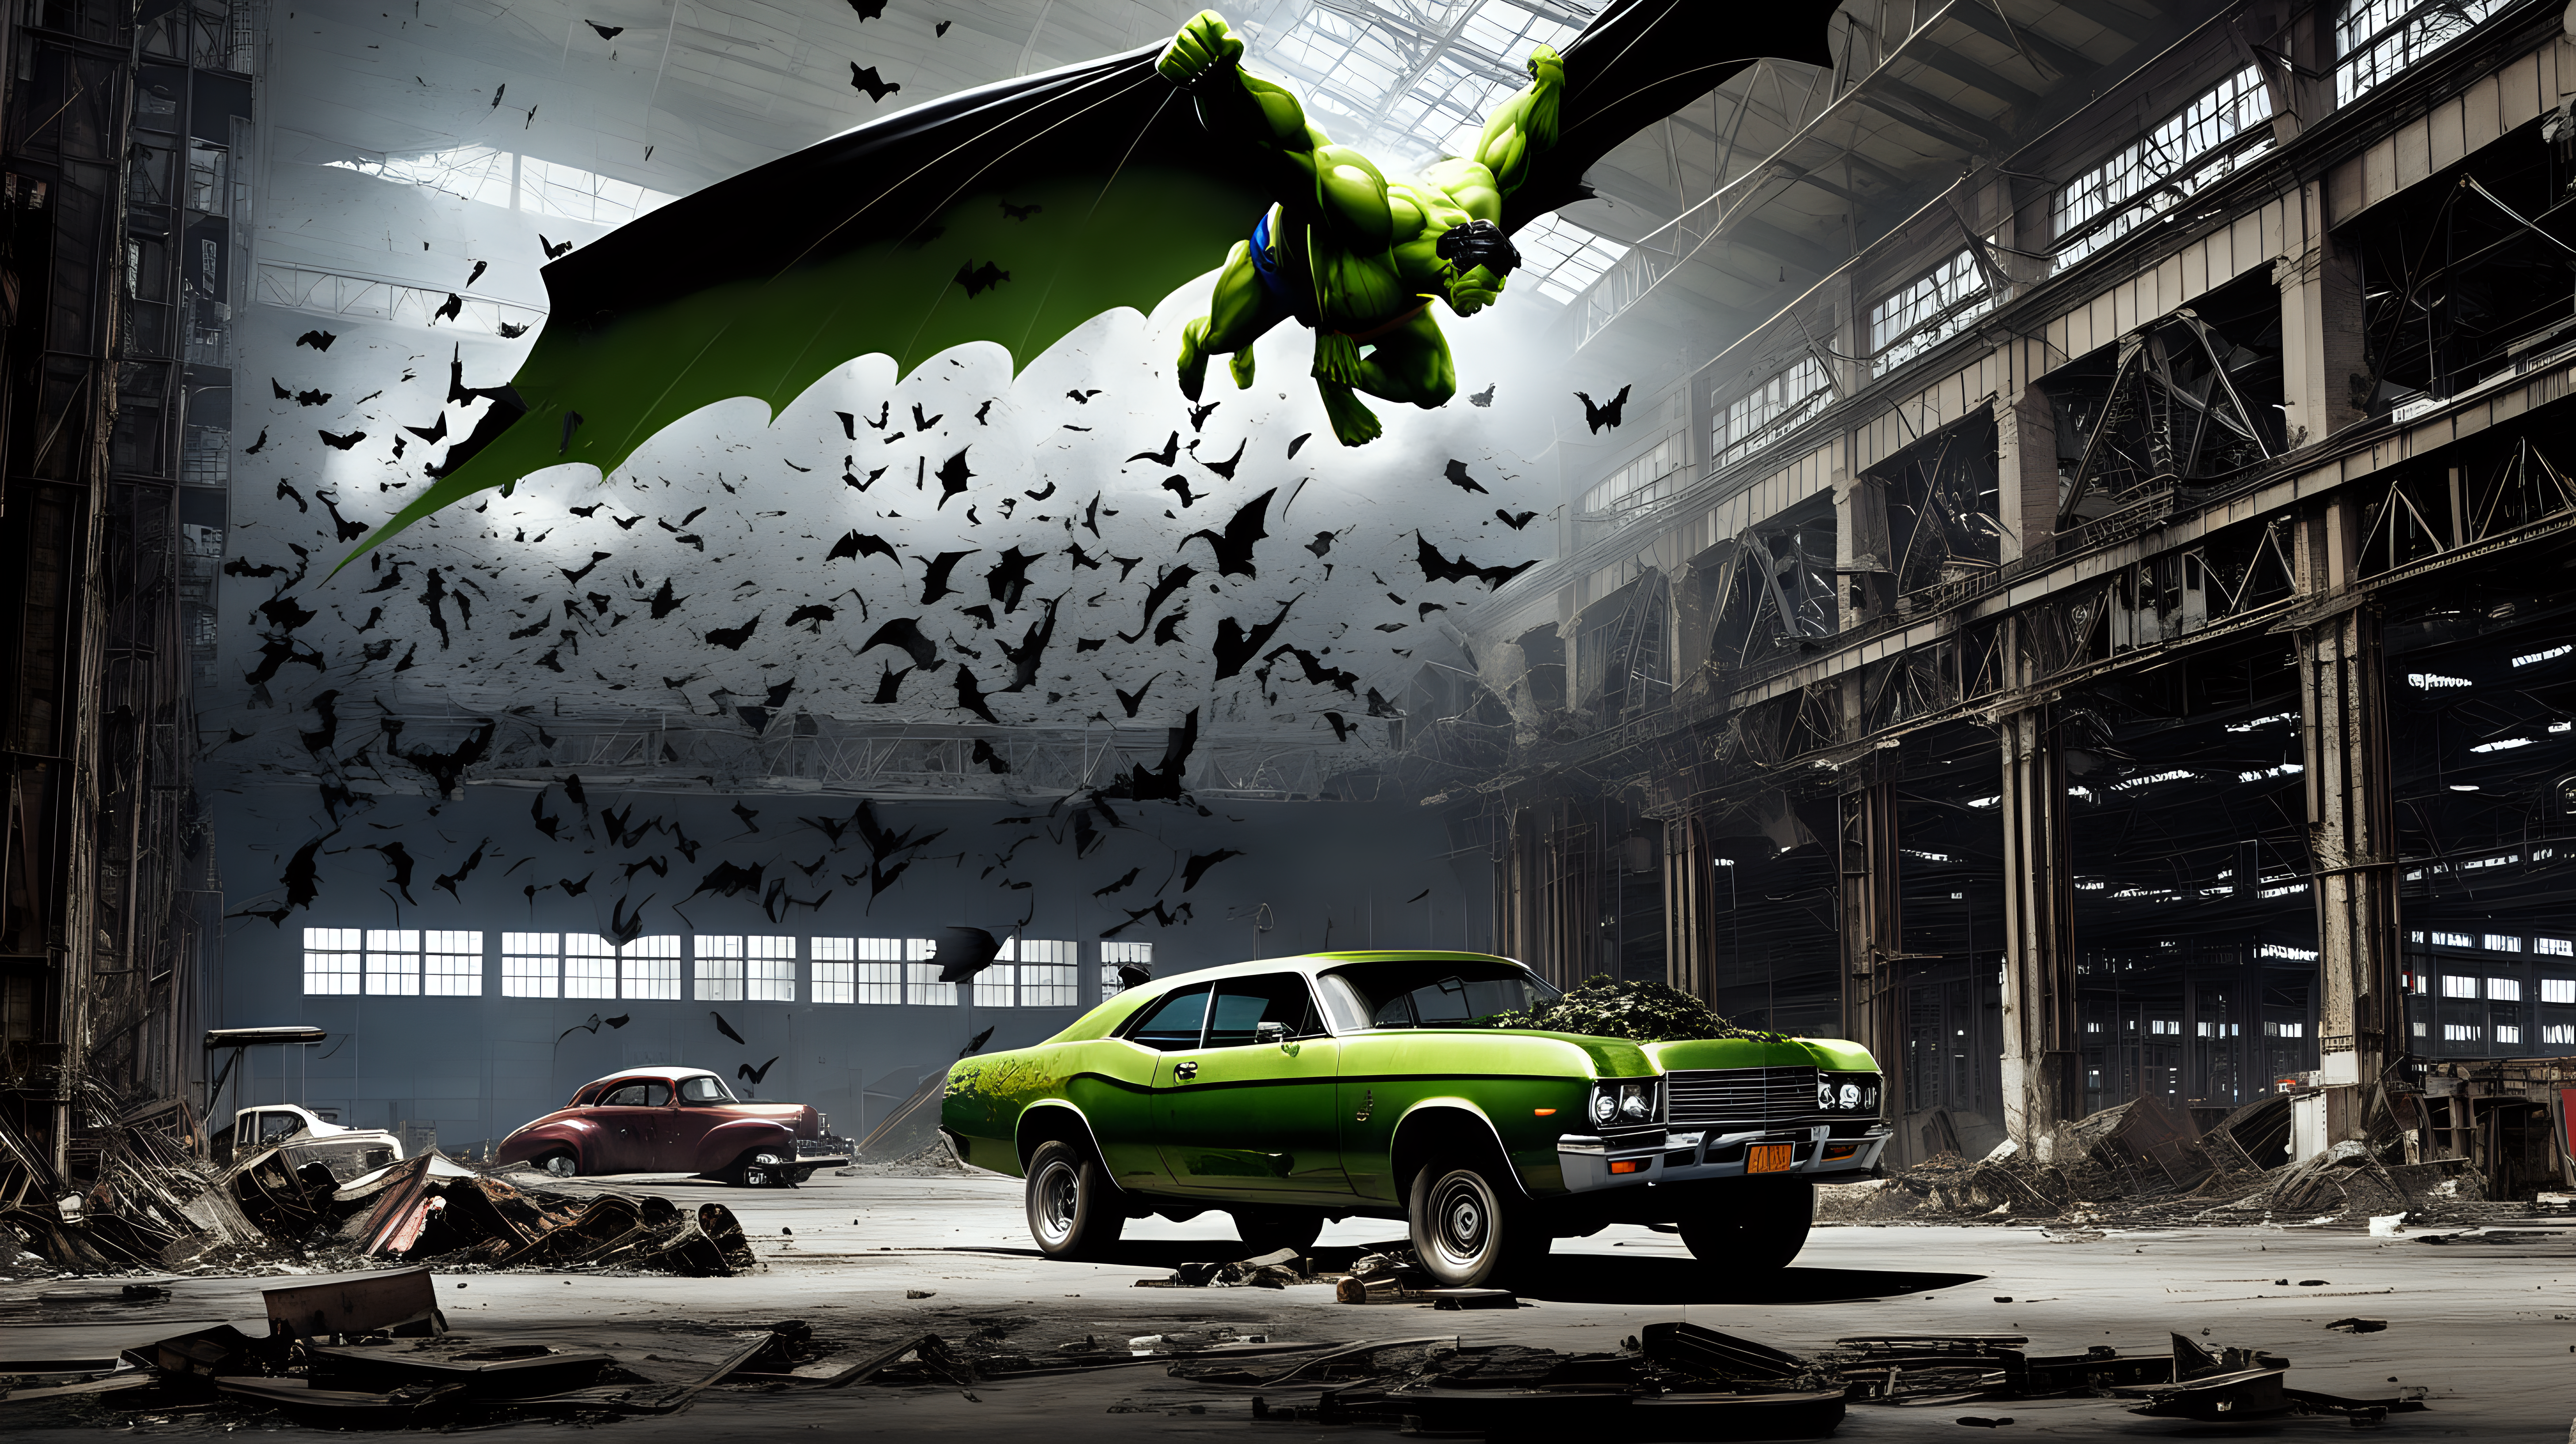 Superman fights the hulk in an abandon car factory with bats flying overhead